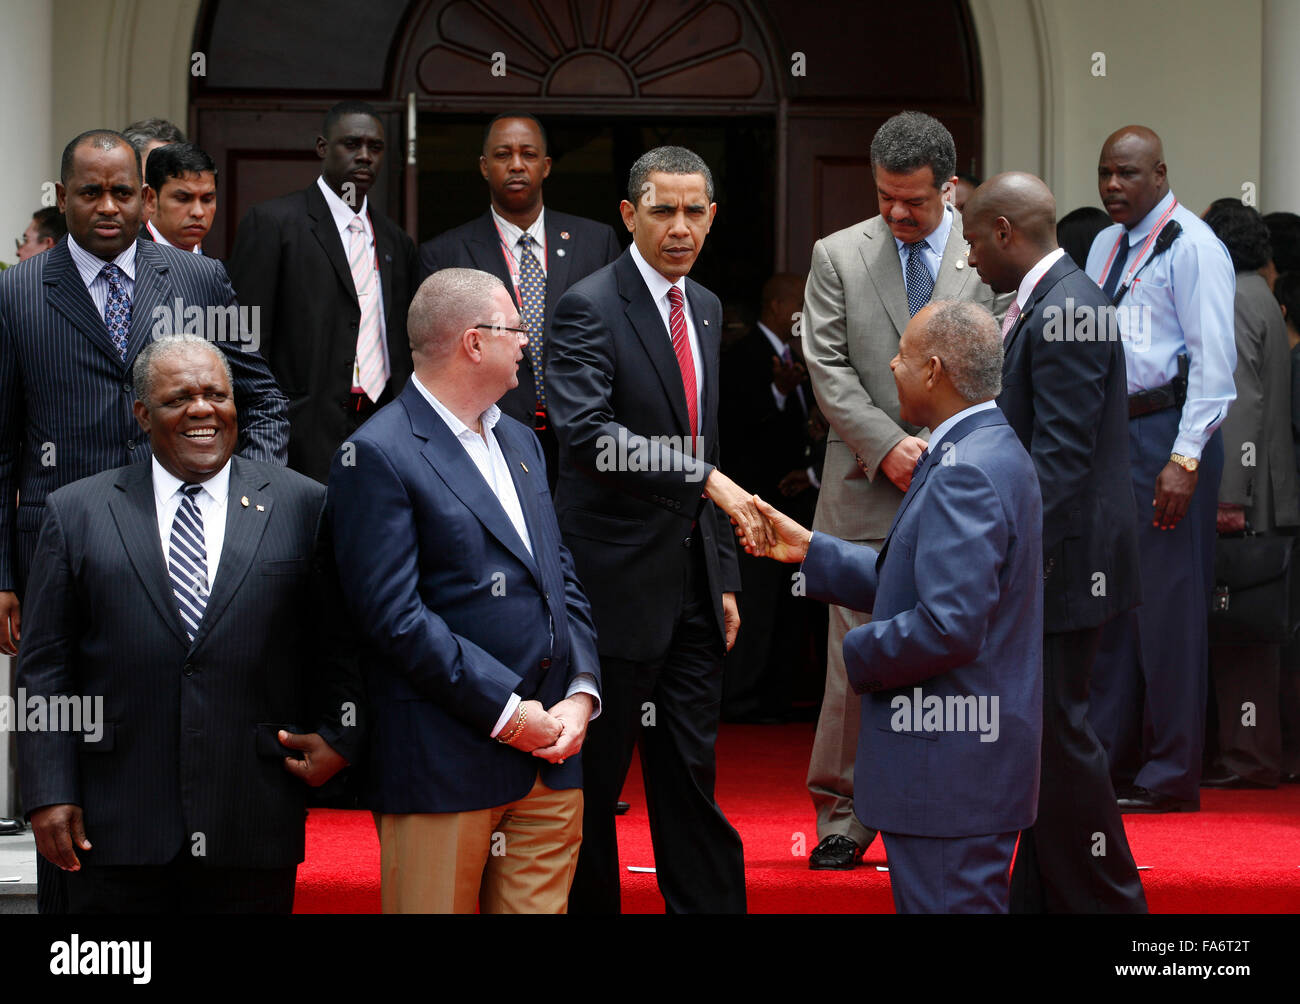 US President Barack Obama (center) attends photo opp with government leaders at the Fifth Summit. (Photo by Sean Drakes/Alamy) Stock Photo